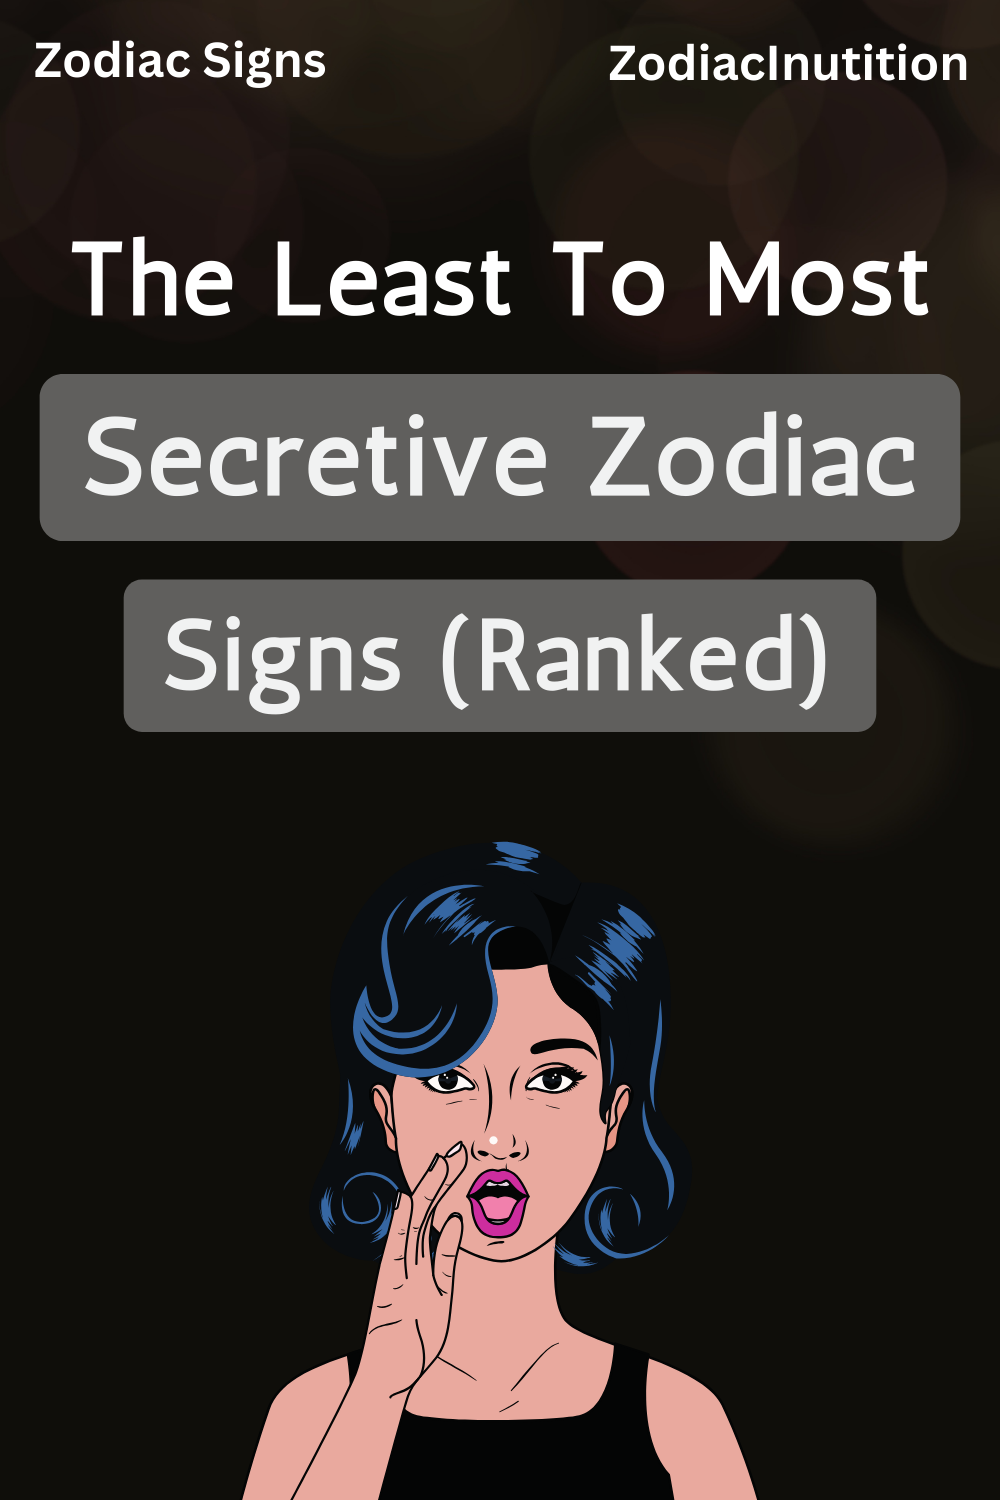 The Least To Most Secretive Zodiac Signs (Ranked)